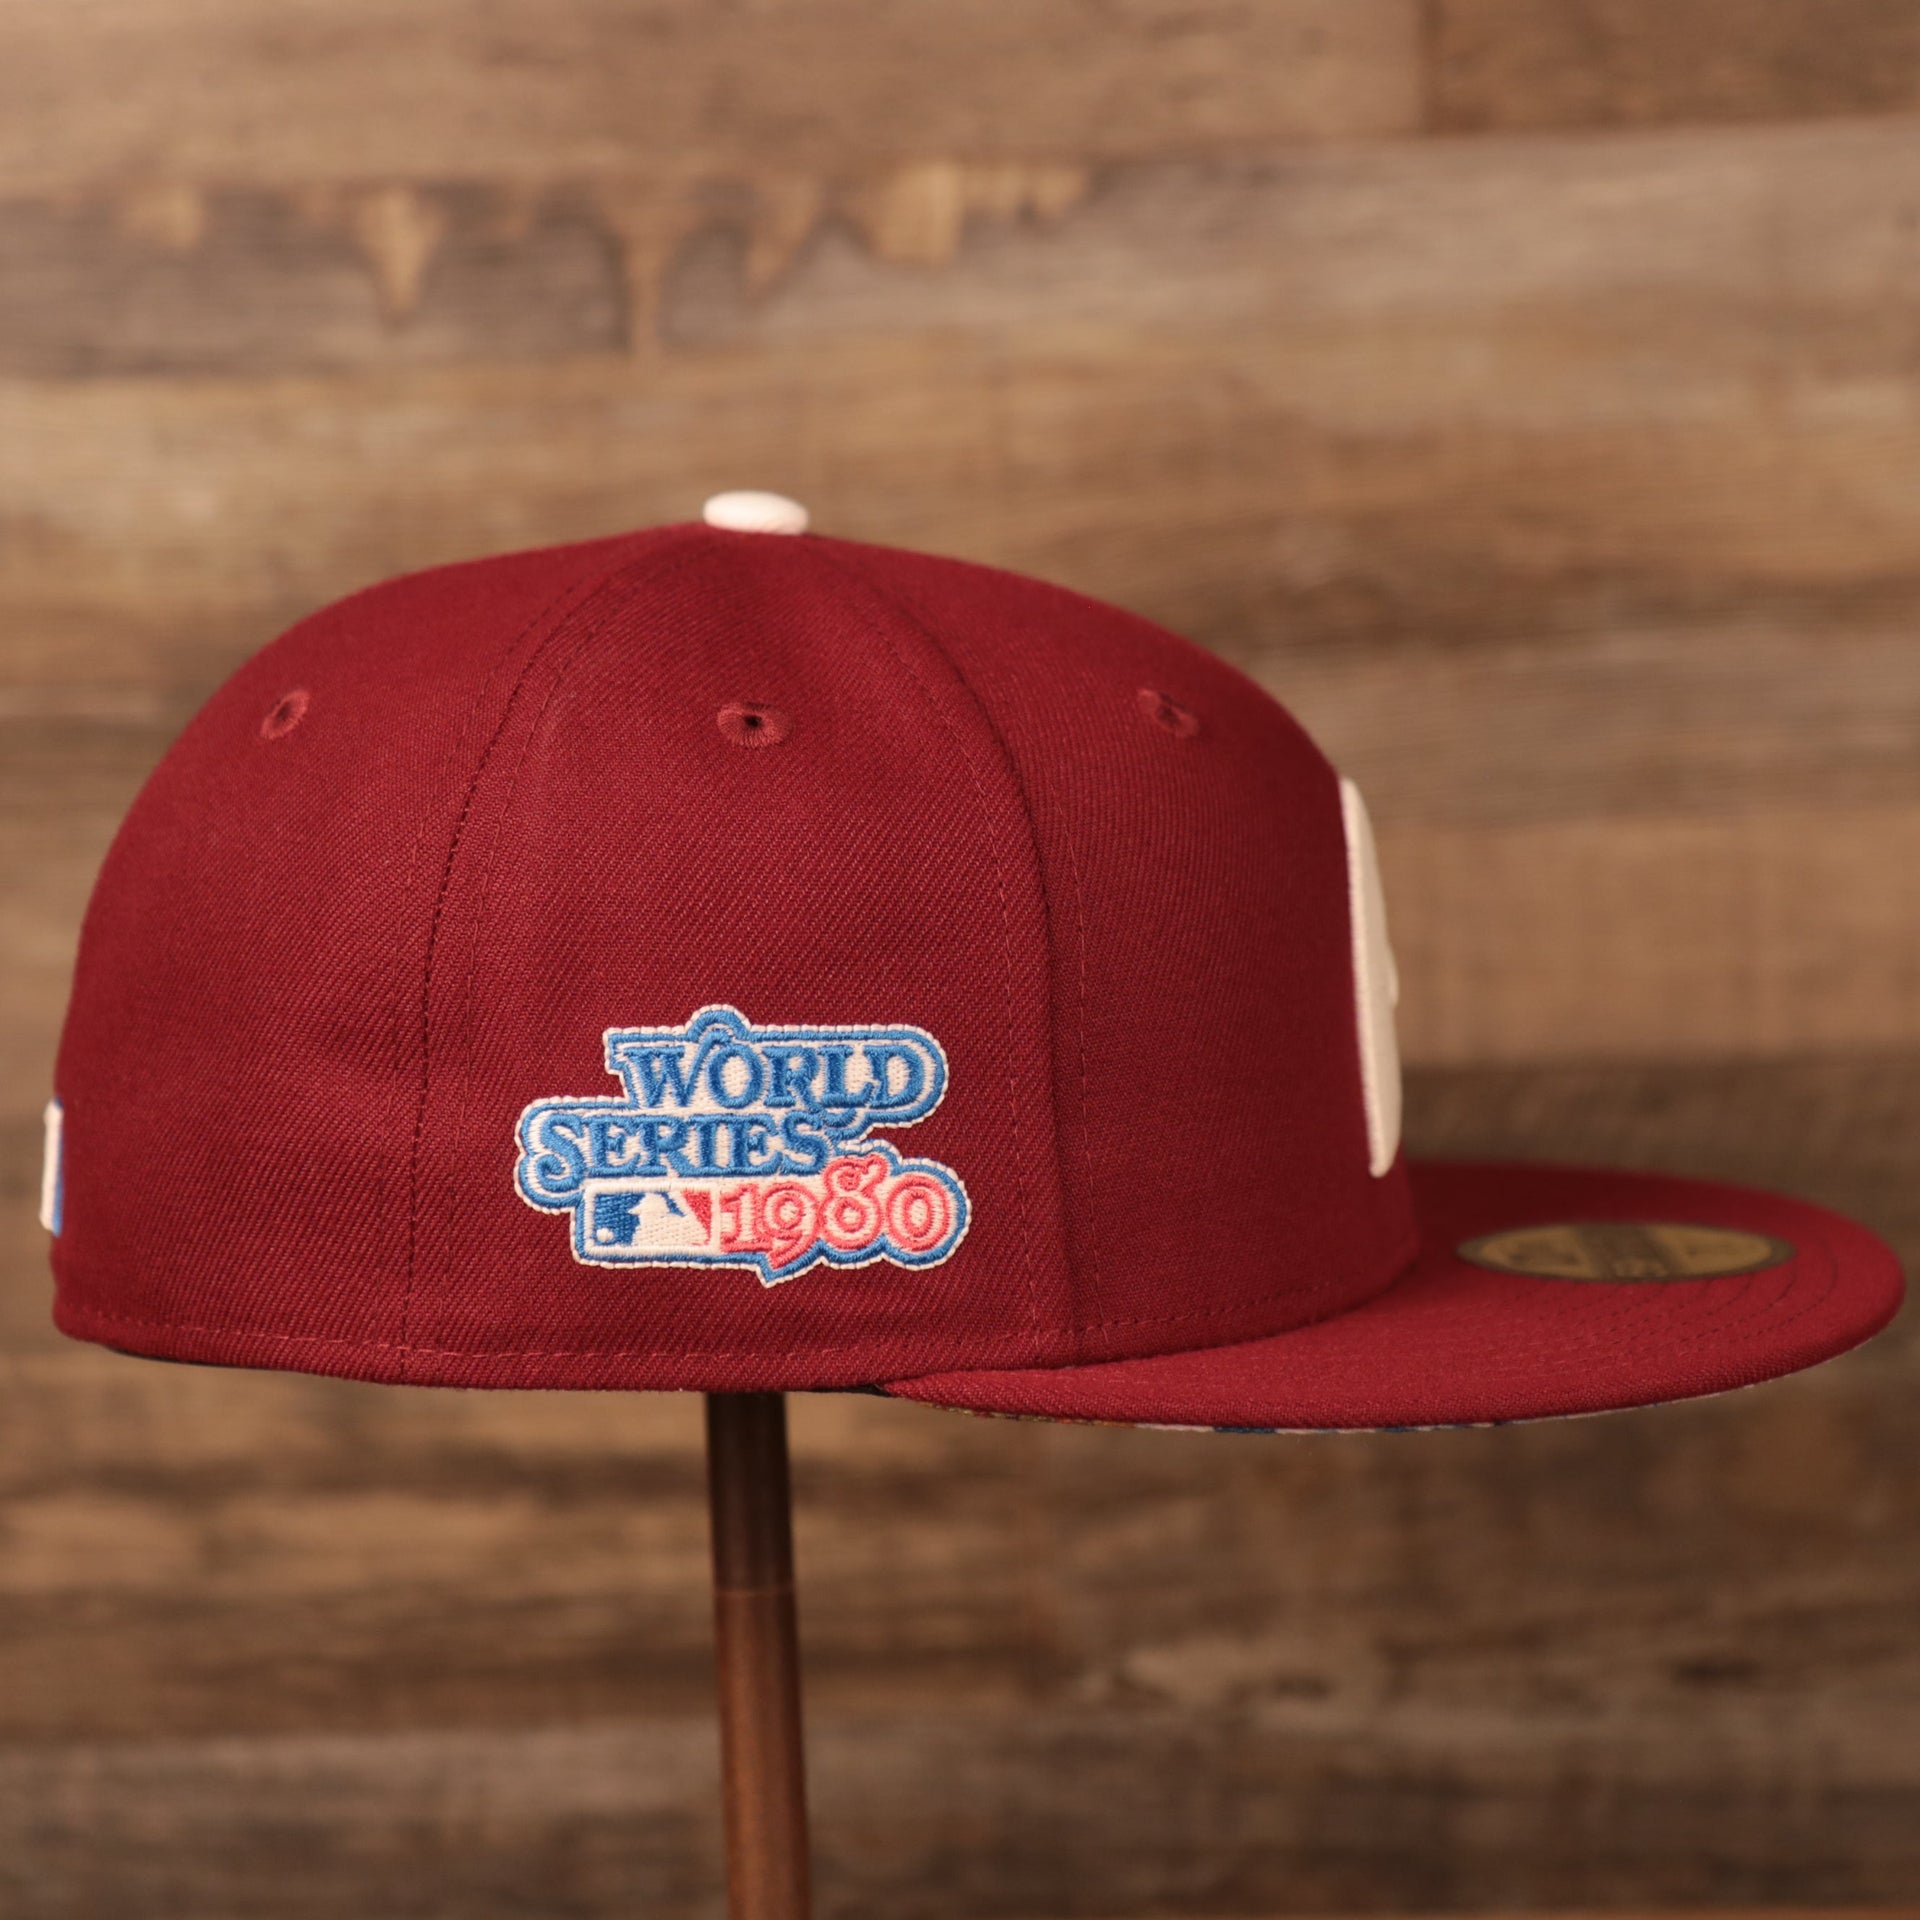 The right side of the retro maroon Philadelphia Phillies white flower bottom brim 59fifty hat has the patch for the 1980 World Series.